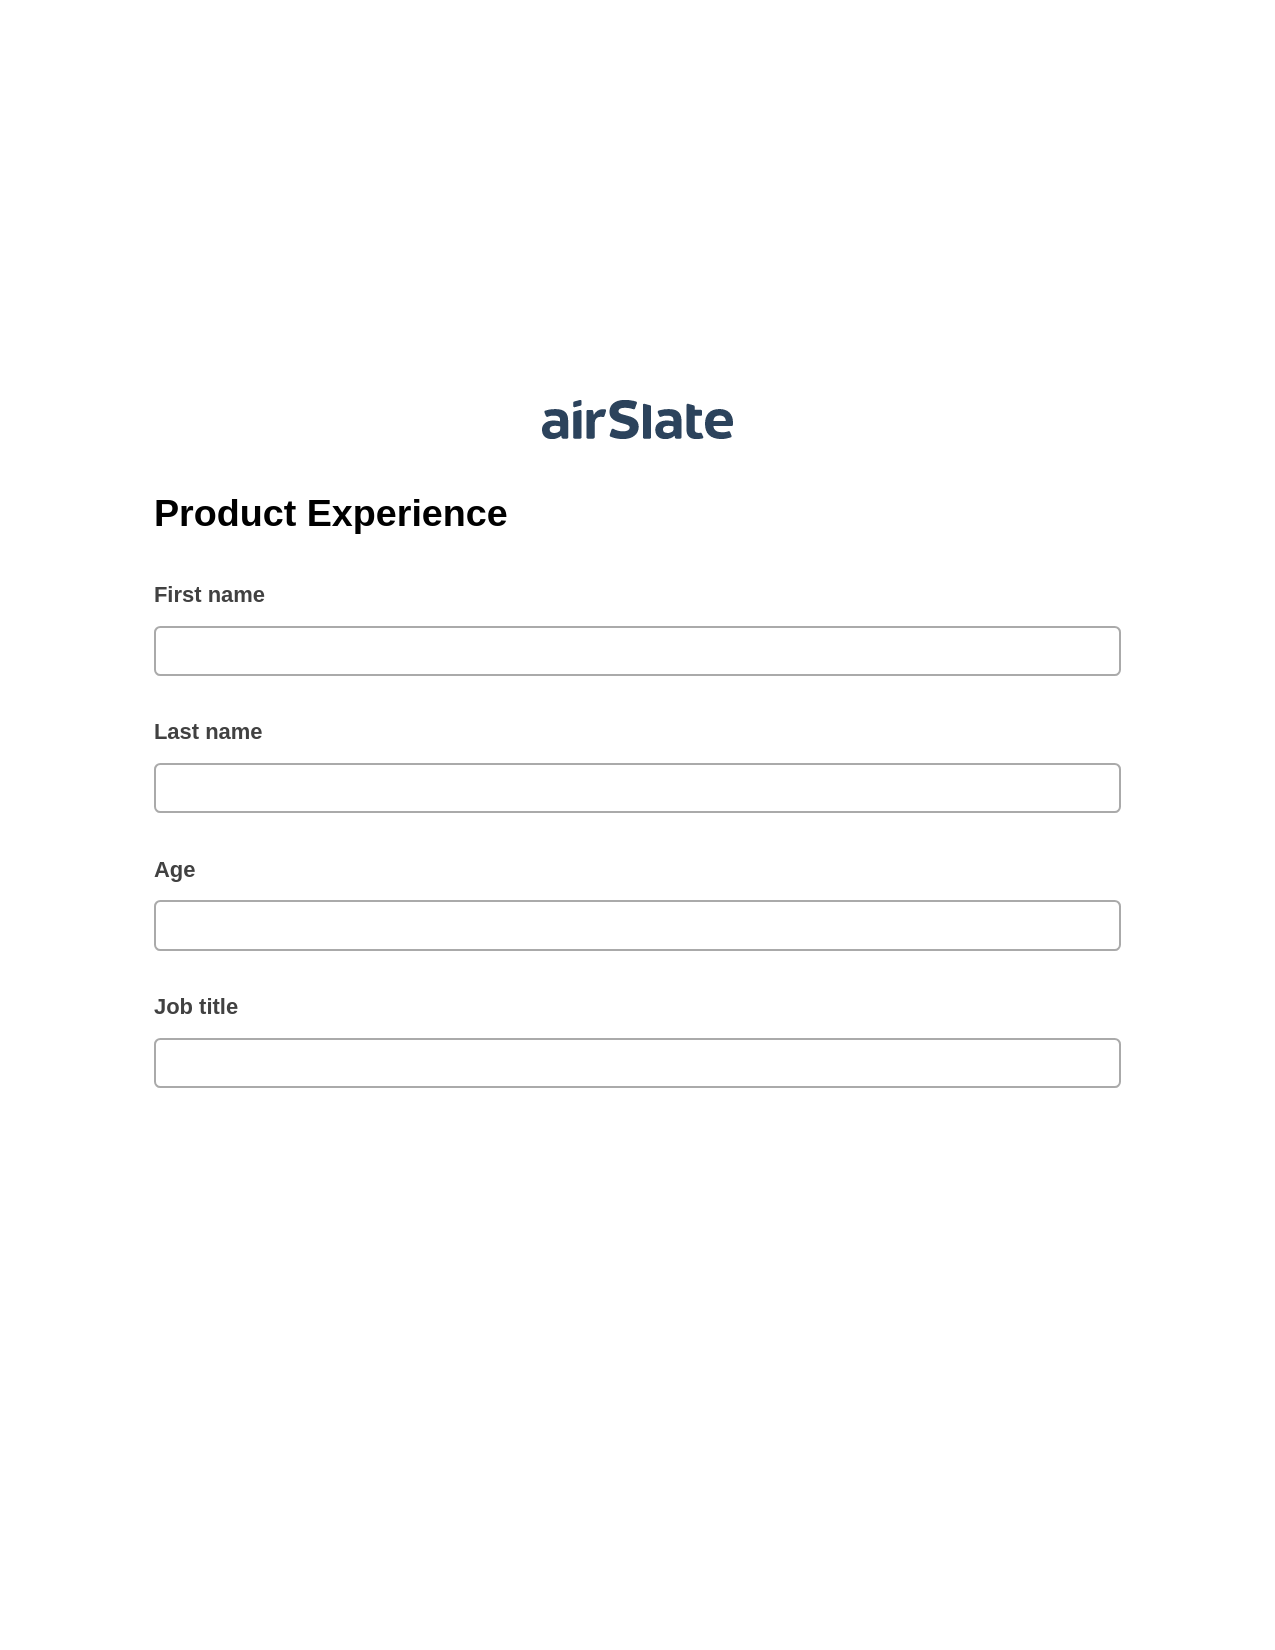 Product Experience Pre-fill from MS Dynamics 365 Records, Lock the Slate Bot, Webhook Postfinish Bot